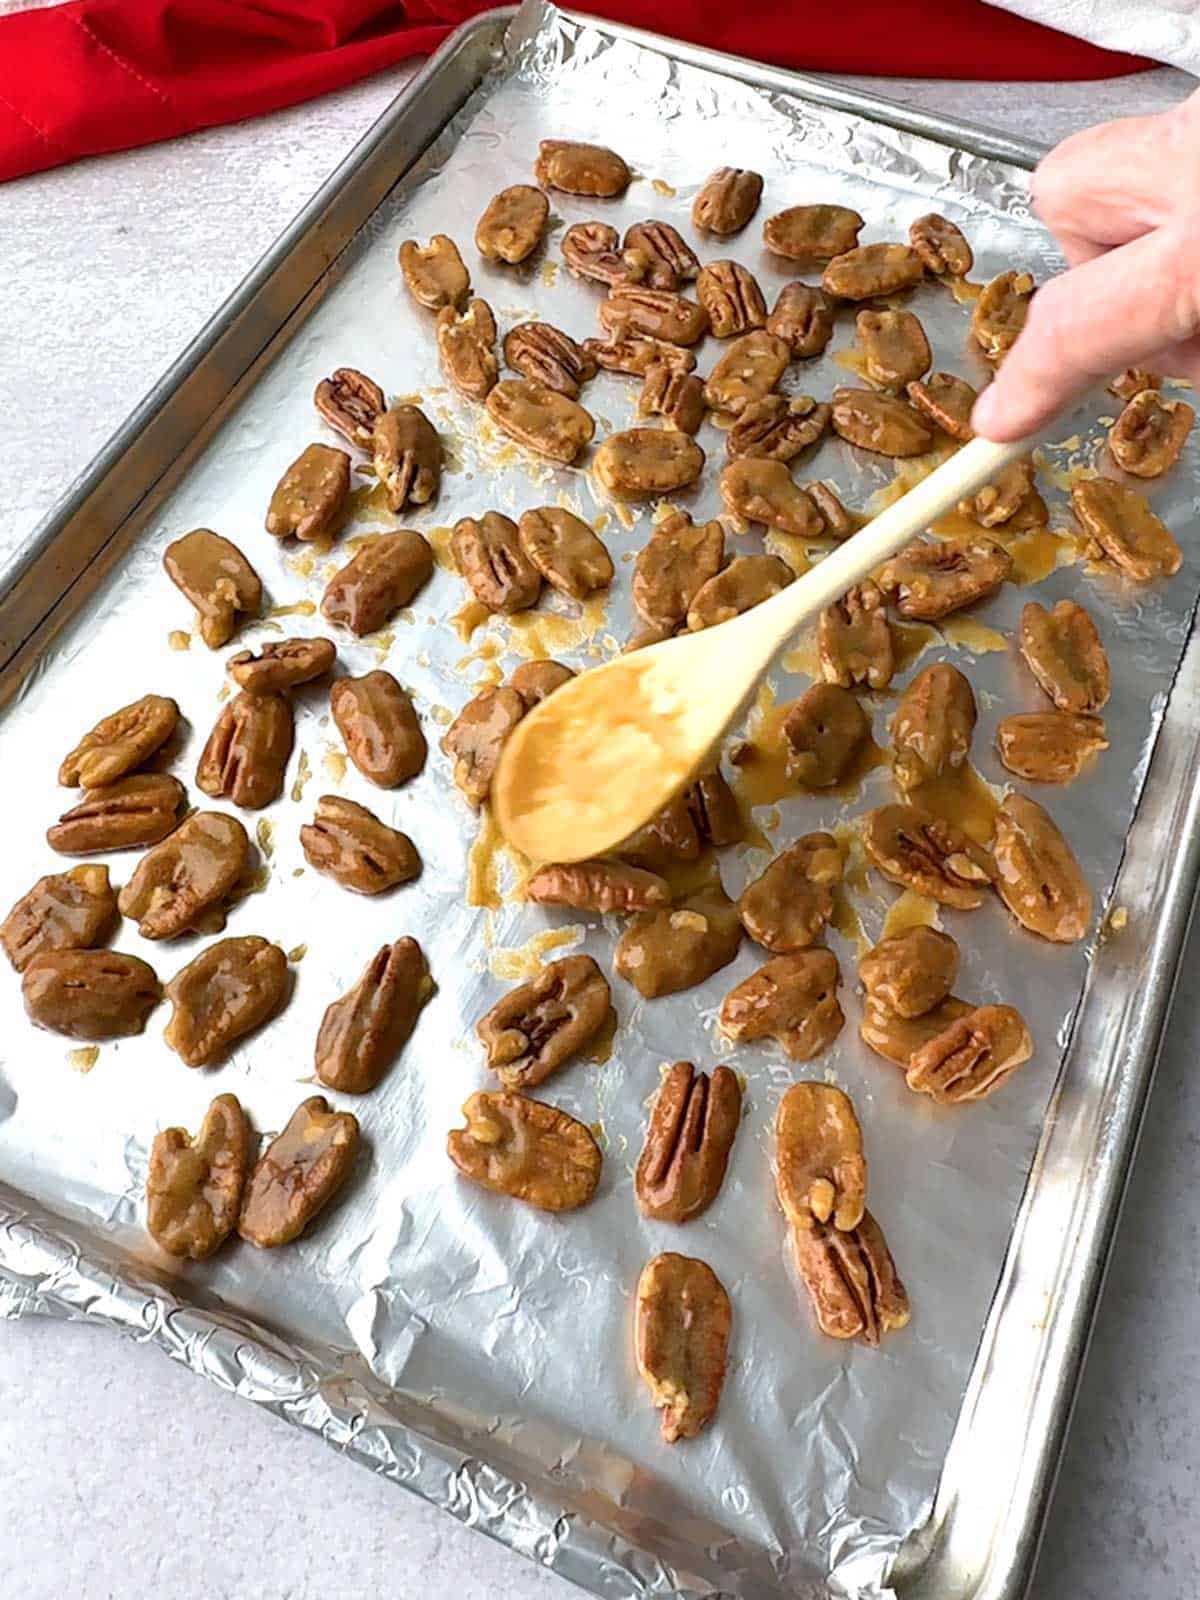 Spreading the coated pecans in a single layer on baking sheet.